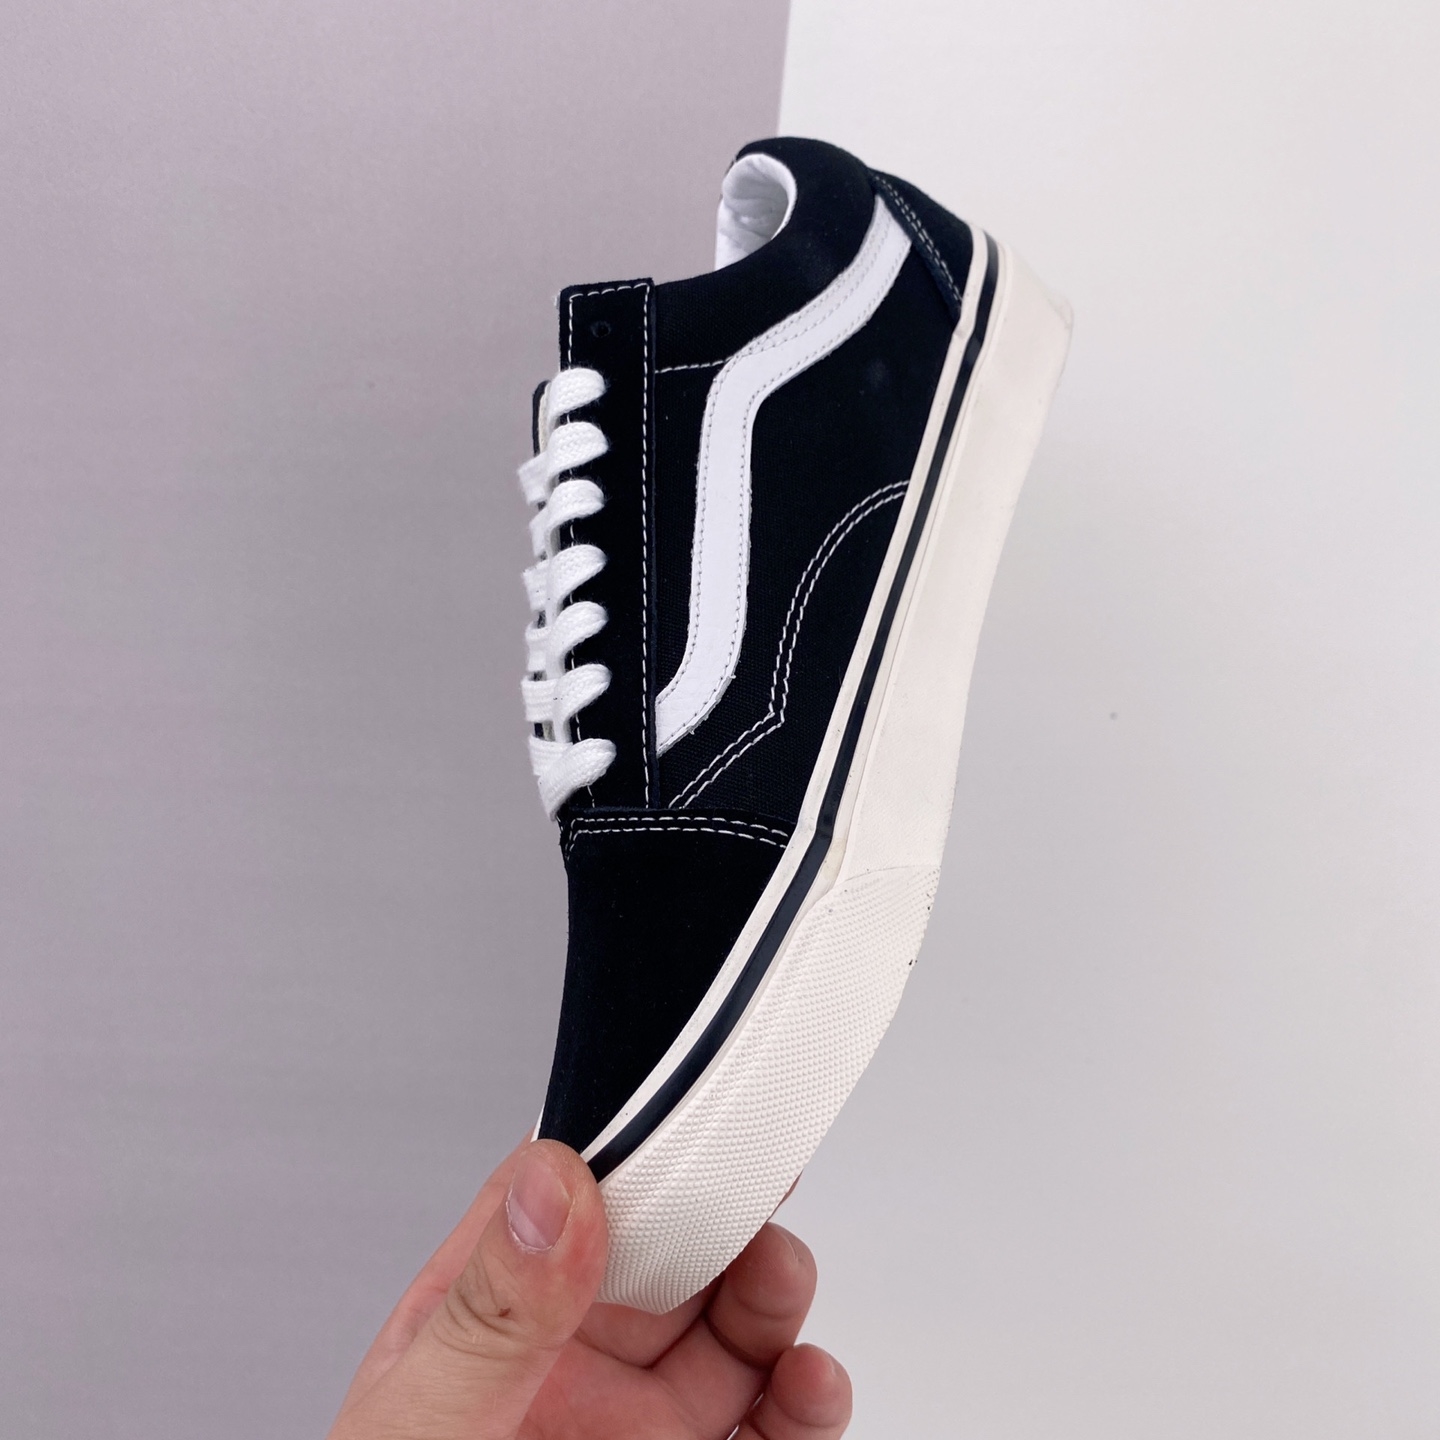 Vans Old Skool 36 DX Black White Shoes - Latest Styles & Quality